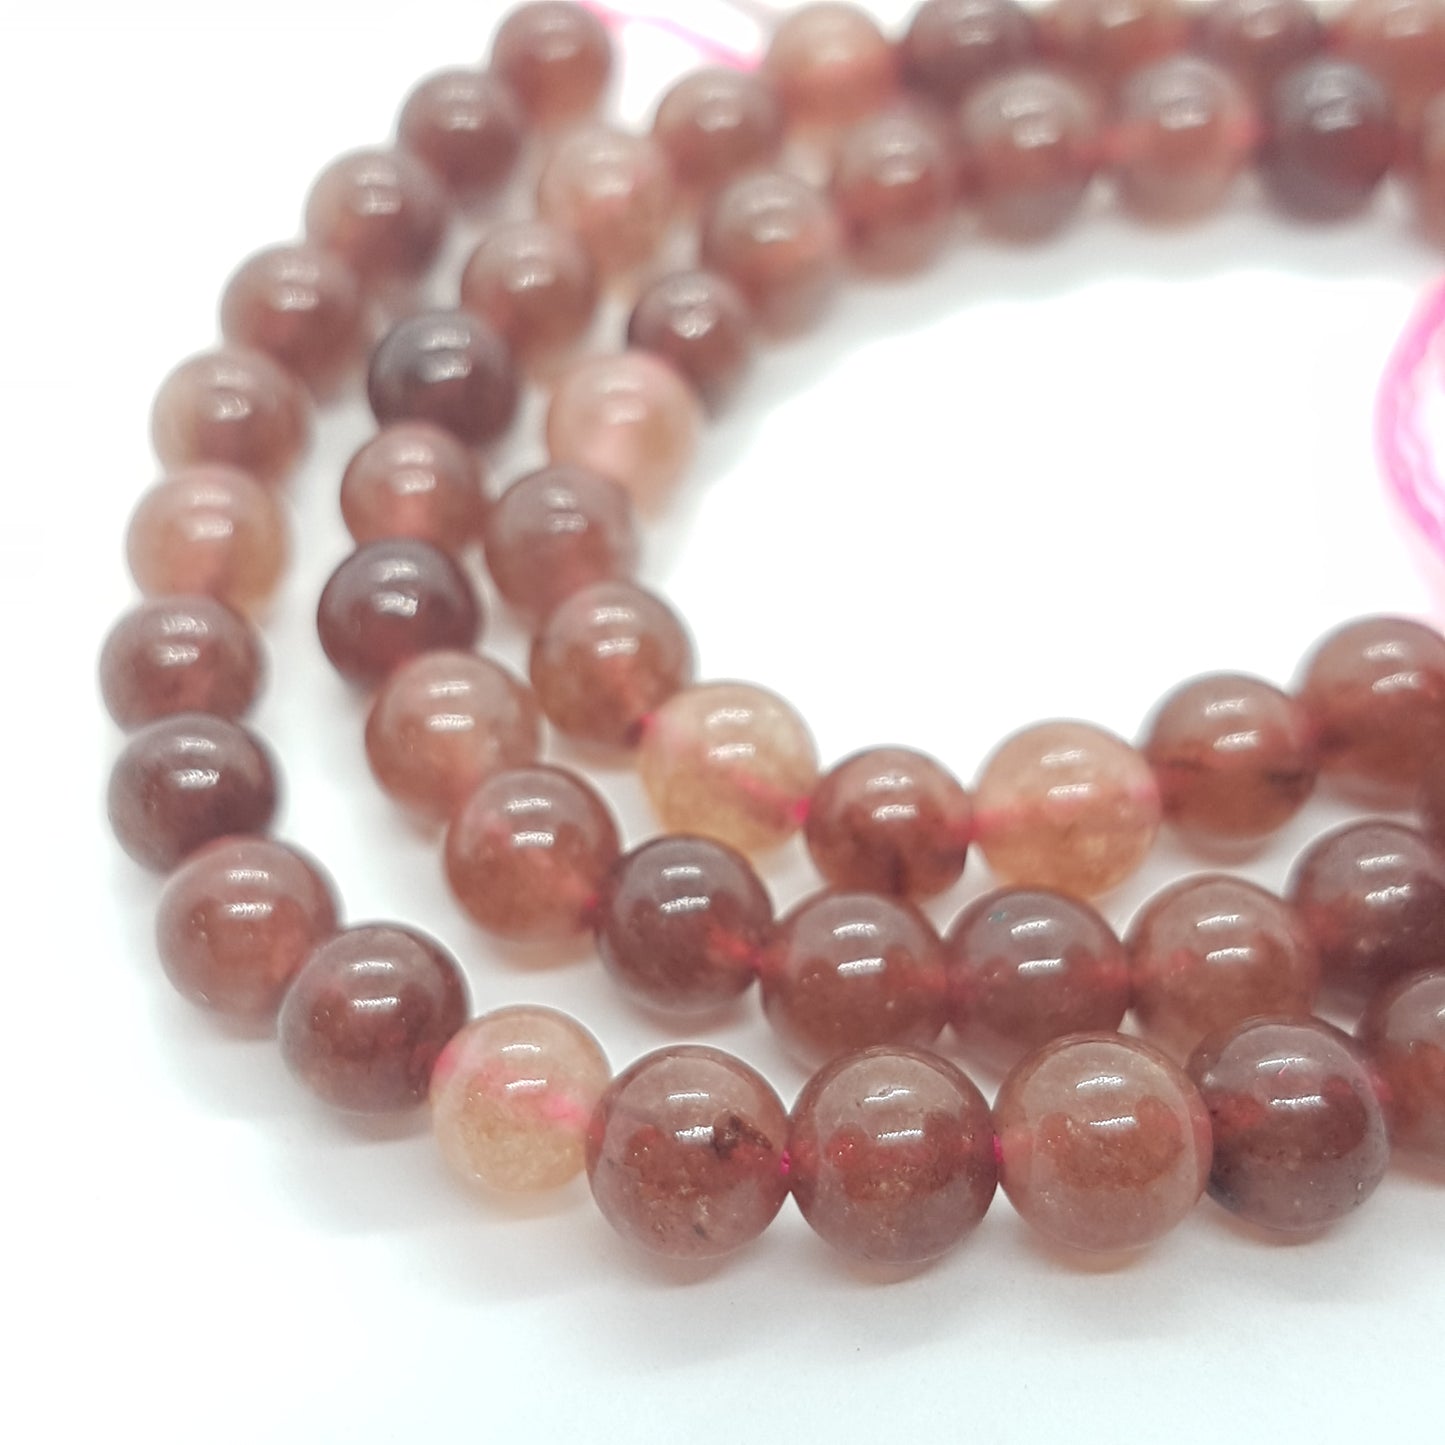 6mm Red Agate Gemstone Beads